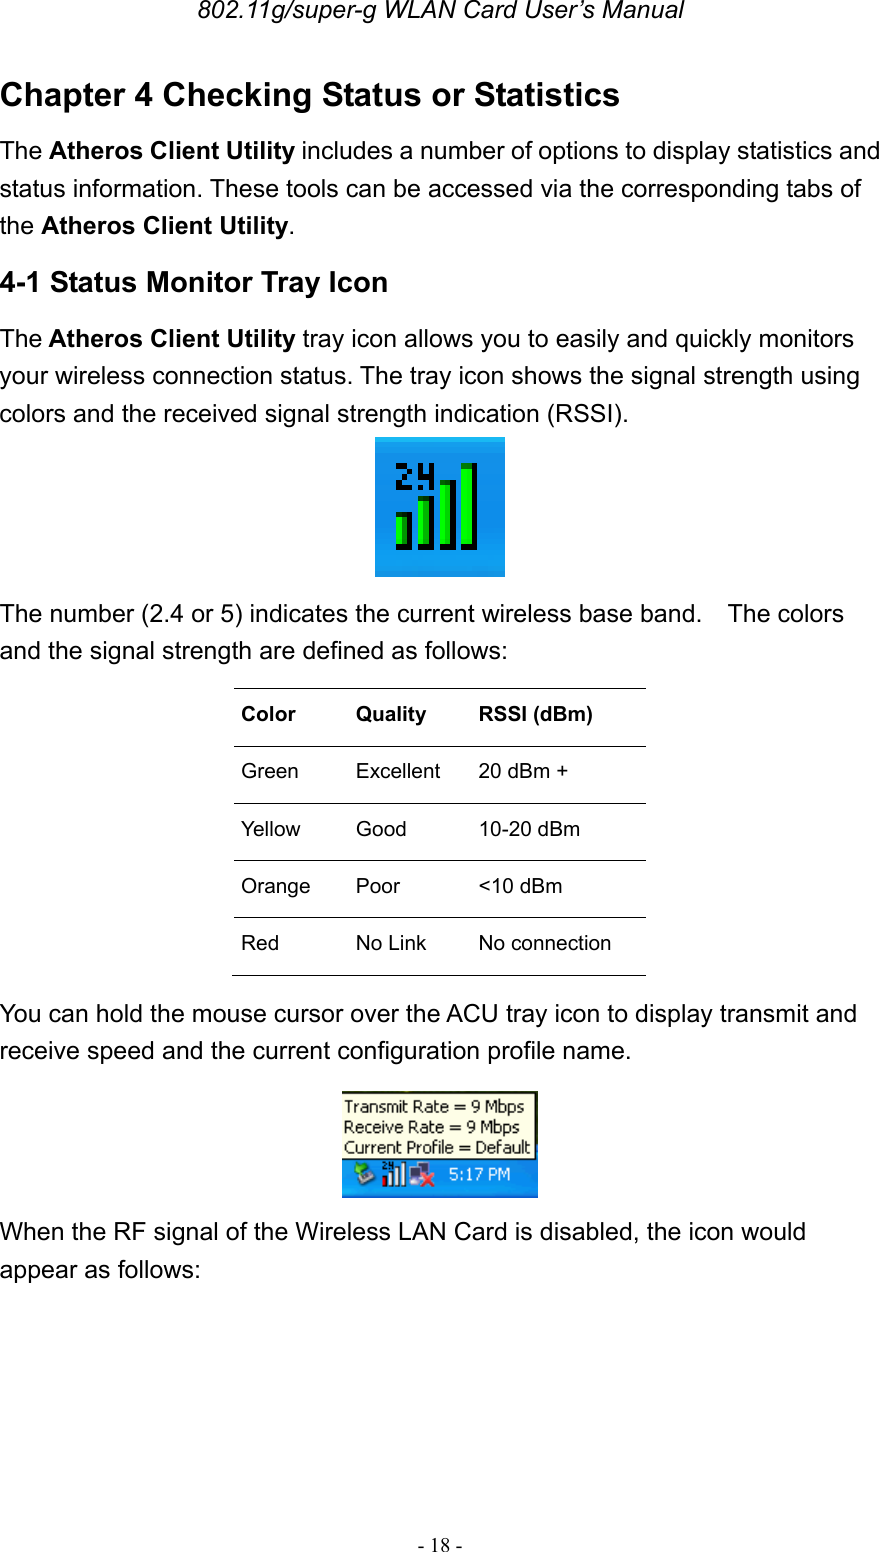 802.11g/super-g WLAN Card User’s Manual - 18 - Chapter 4 Checking Status or Statistics The Atheros Client Utility includes a number of options to display statistics and status information. These tools can be accessed via the corresponding tabs of the Atheros Client Utility. 4-1 Status Monitor Tray Icon The Atheros Client Utility tray icon allows you to easily and quickly monitors your wireless connection status. The tray icon shows the signal strength using colors and the received signal strength indication (RSSI).   The number (2.4 or 5) indicates the current wireless base band.    The colors and the signal strength are defined as follows: Color  Quality  RSSI (dBm) Green   Excellent  20 dBm + Yellow   Good  10-20 dBm Orange   Poor  &lt;10 dBm Red   No Link No connection You can hold the mouse cursor over the ACU tray icon to display transmit and receive speed and the current configuration profile name.  When the RF signal of the Wireless LAN Card is disabled, the icon would appear as follows: 